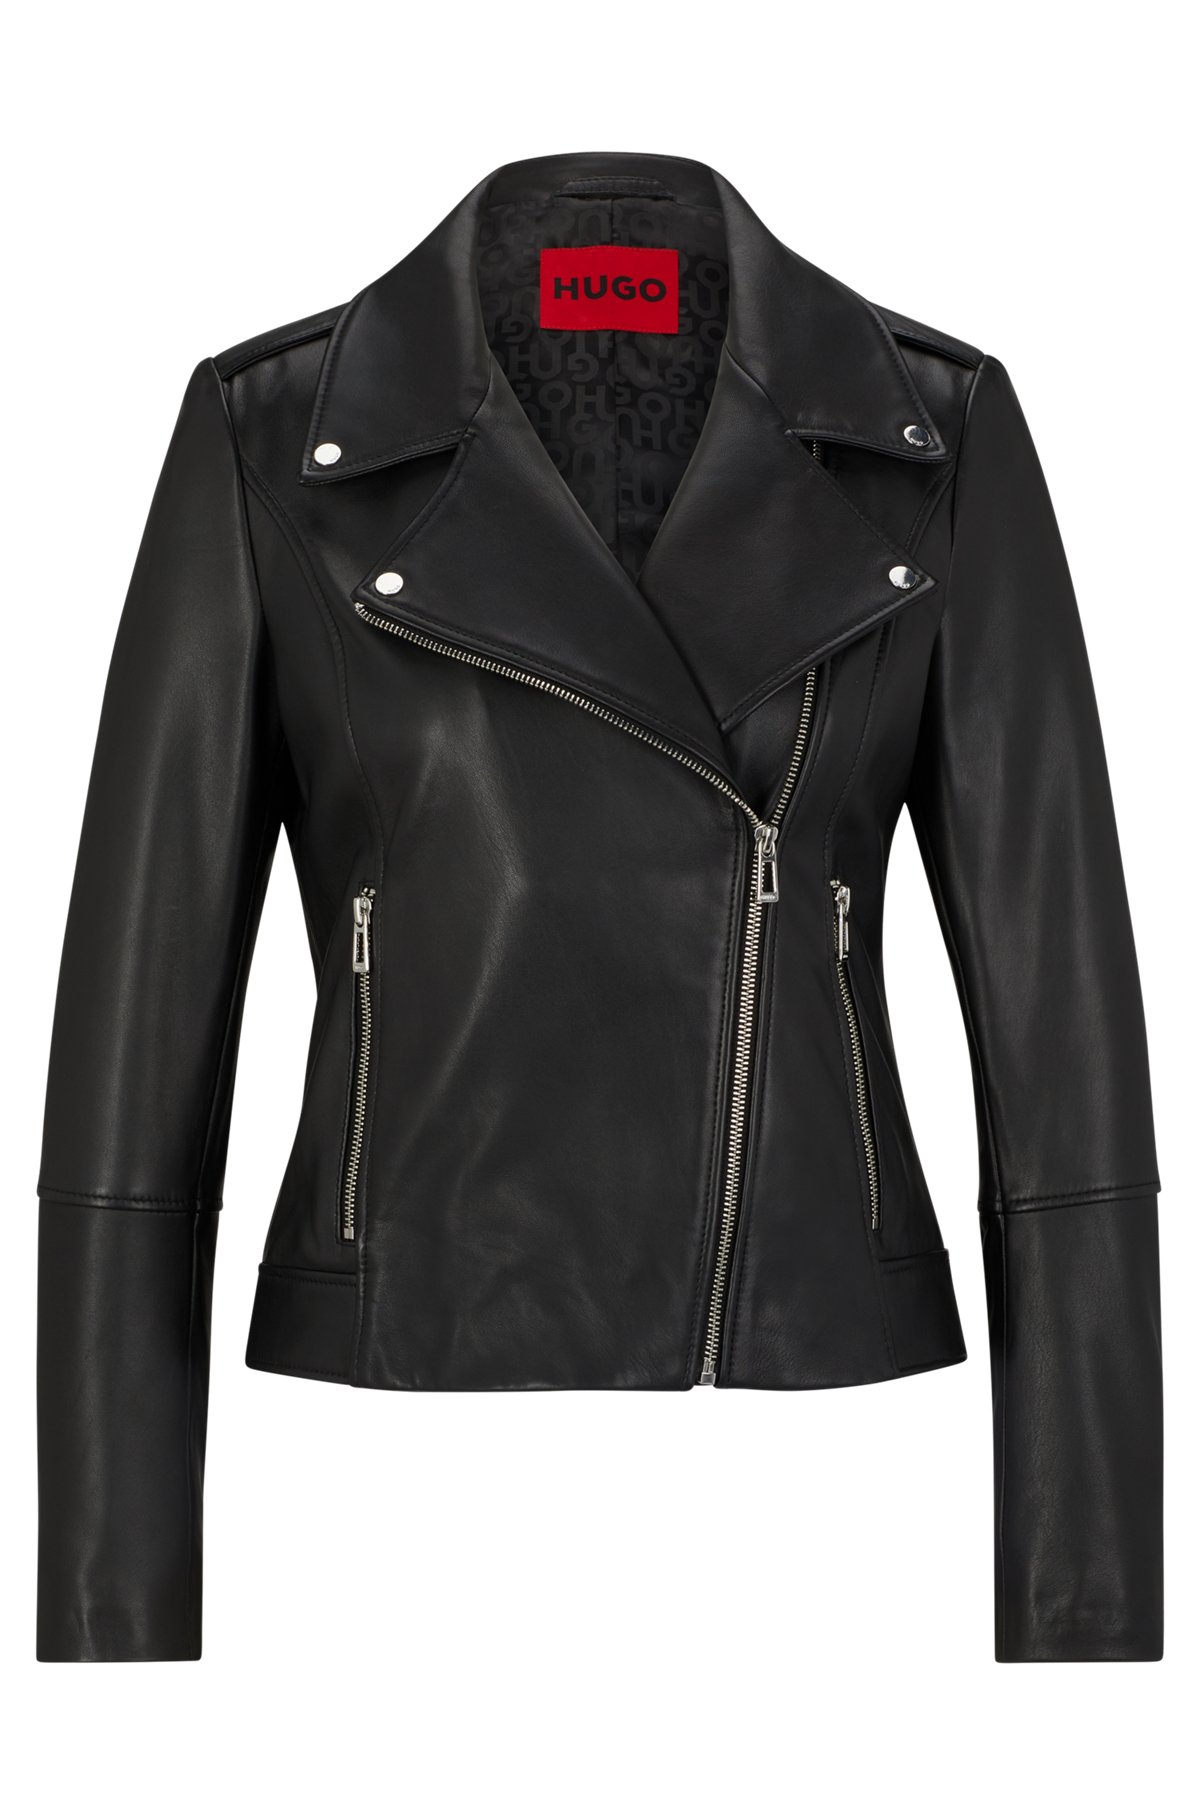 Oiled-leather jacket with asymmetric zip, Black